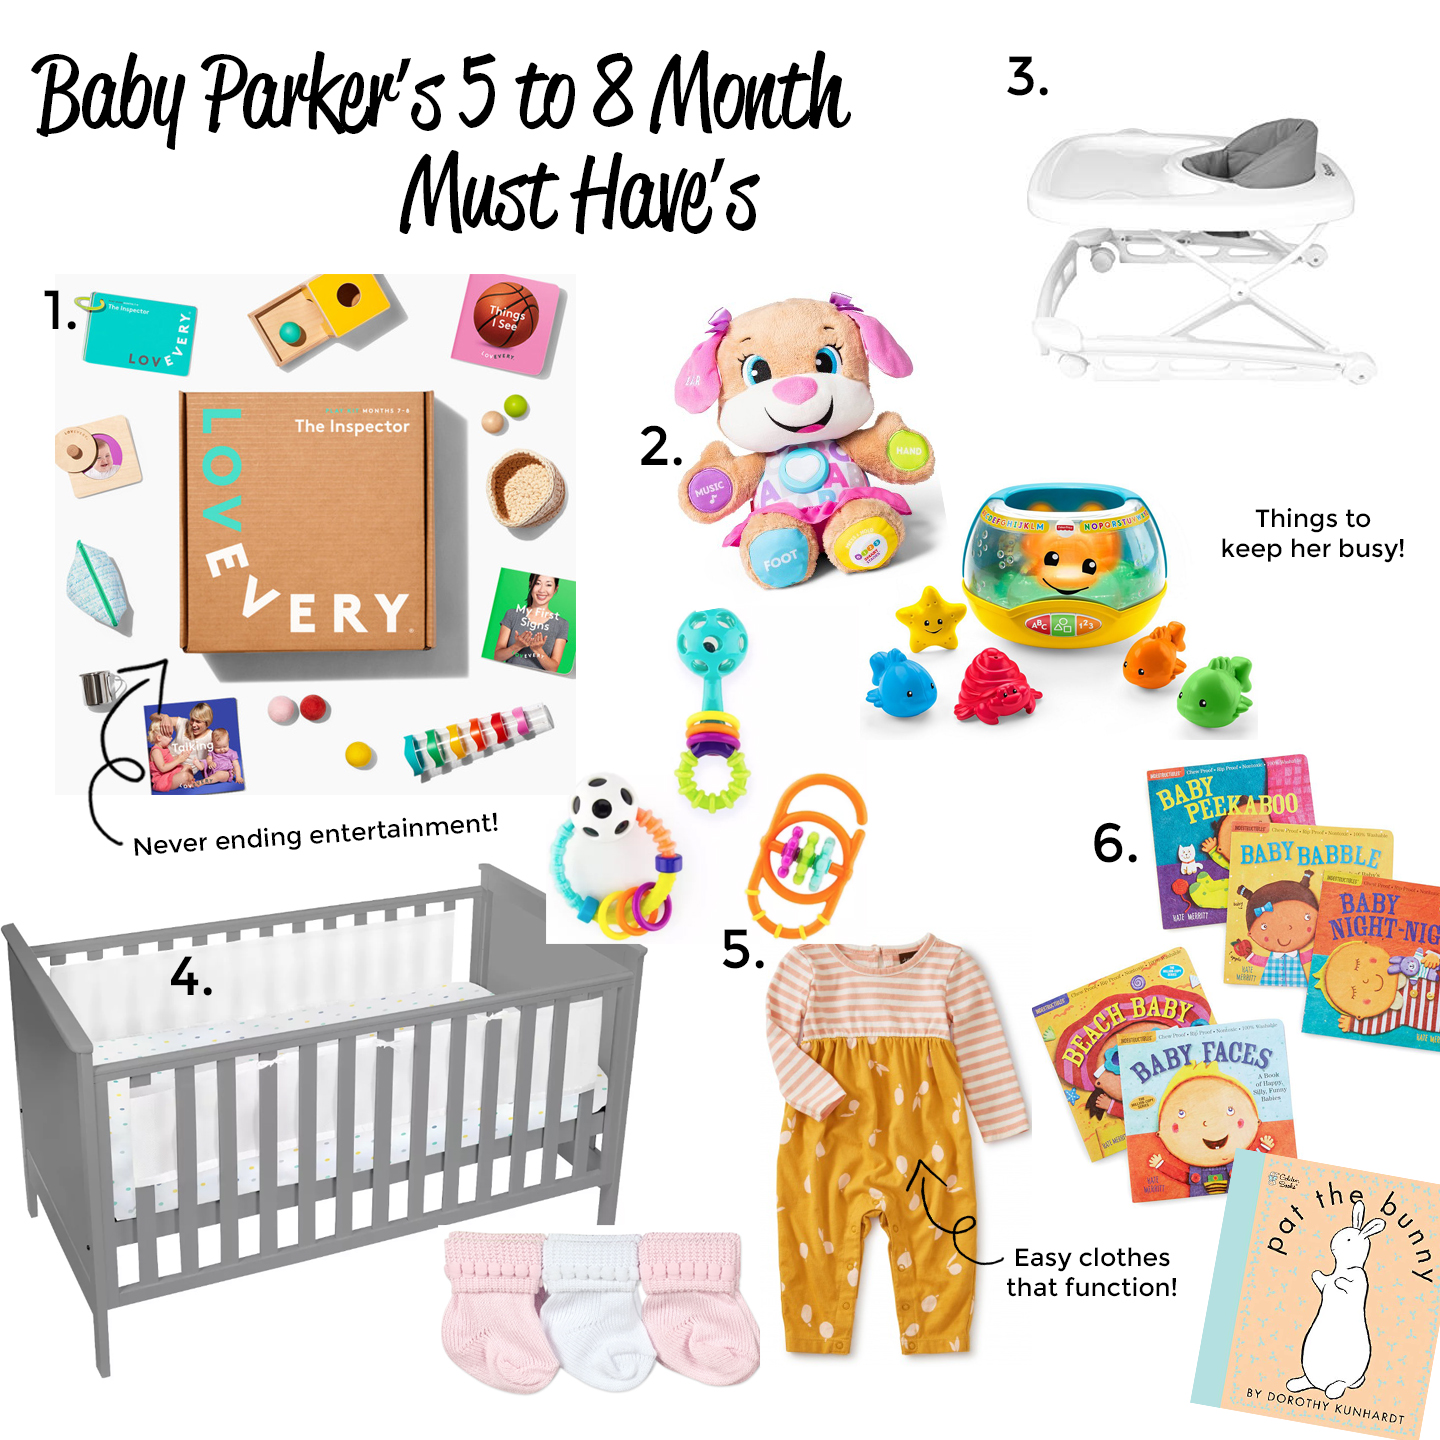 5 to 8 month old baby favorites